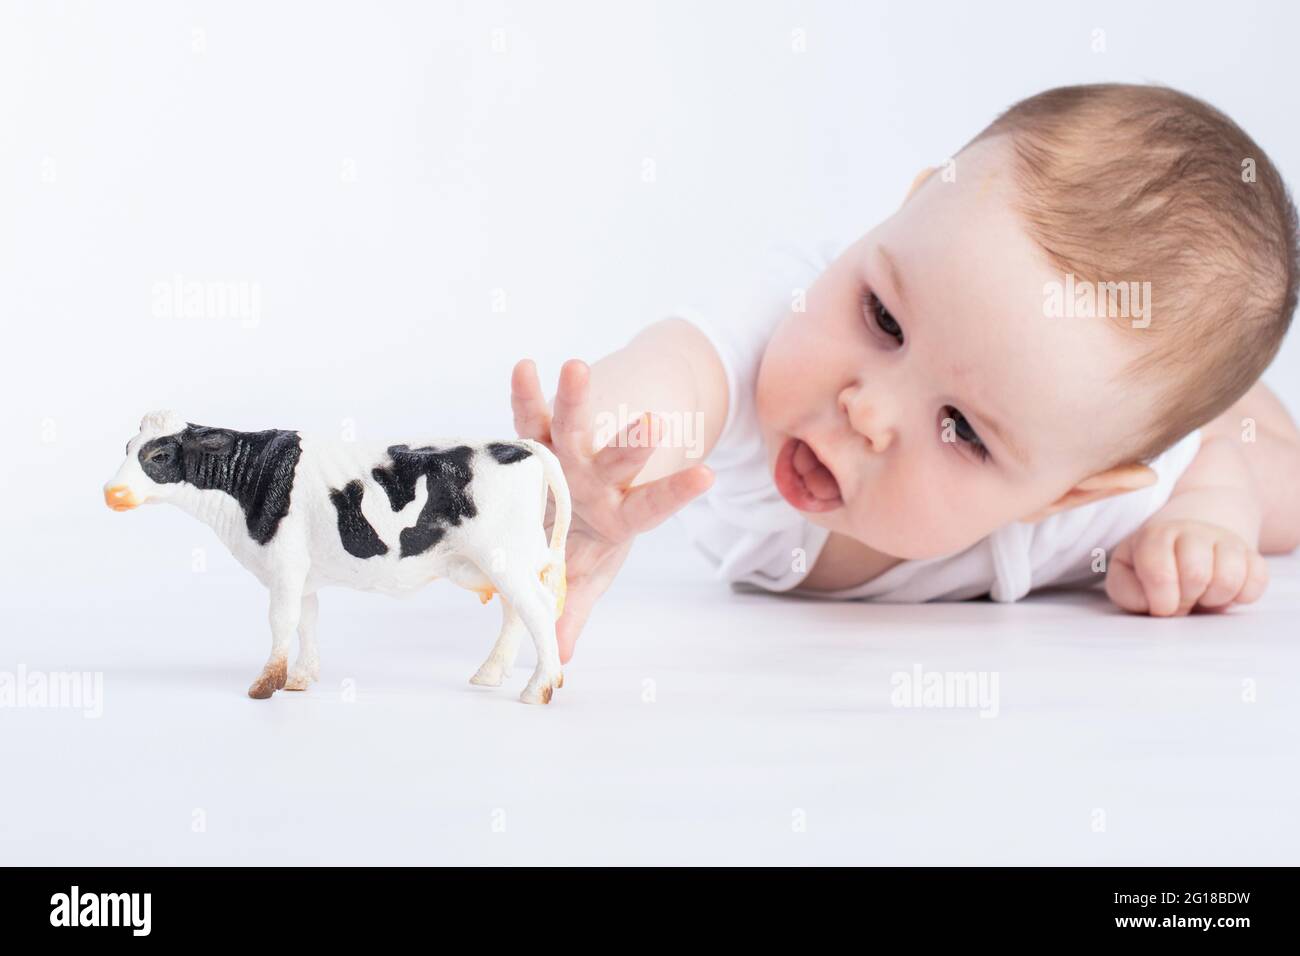 baby and dairy products, concept Stock Photo